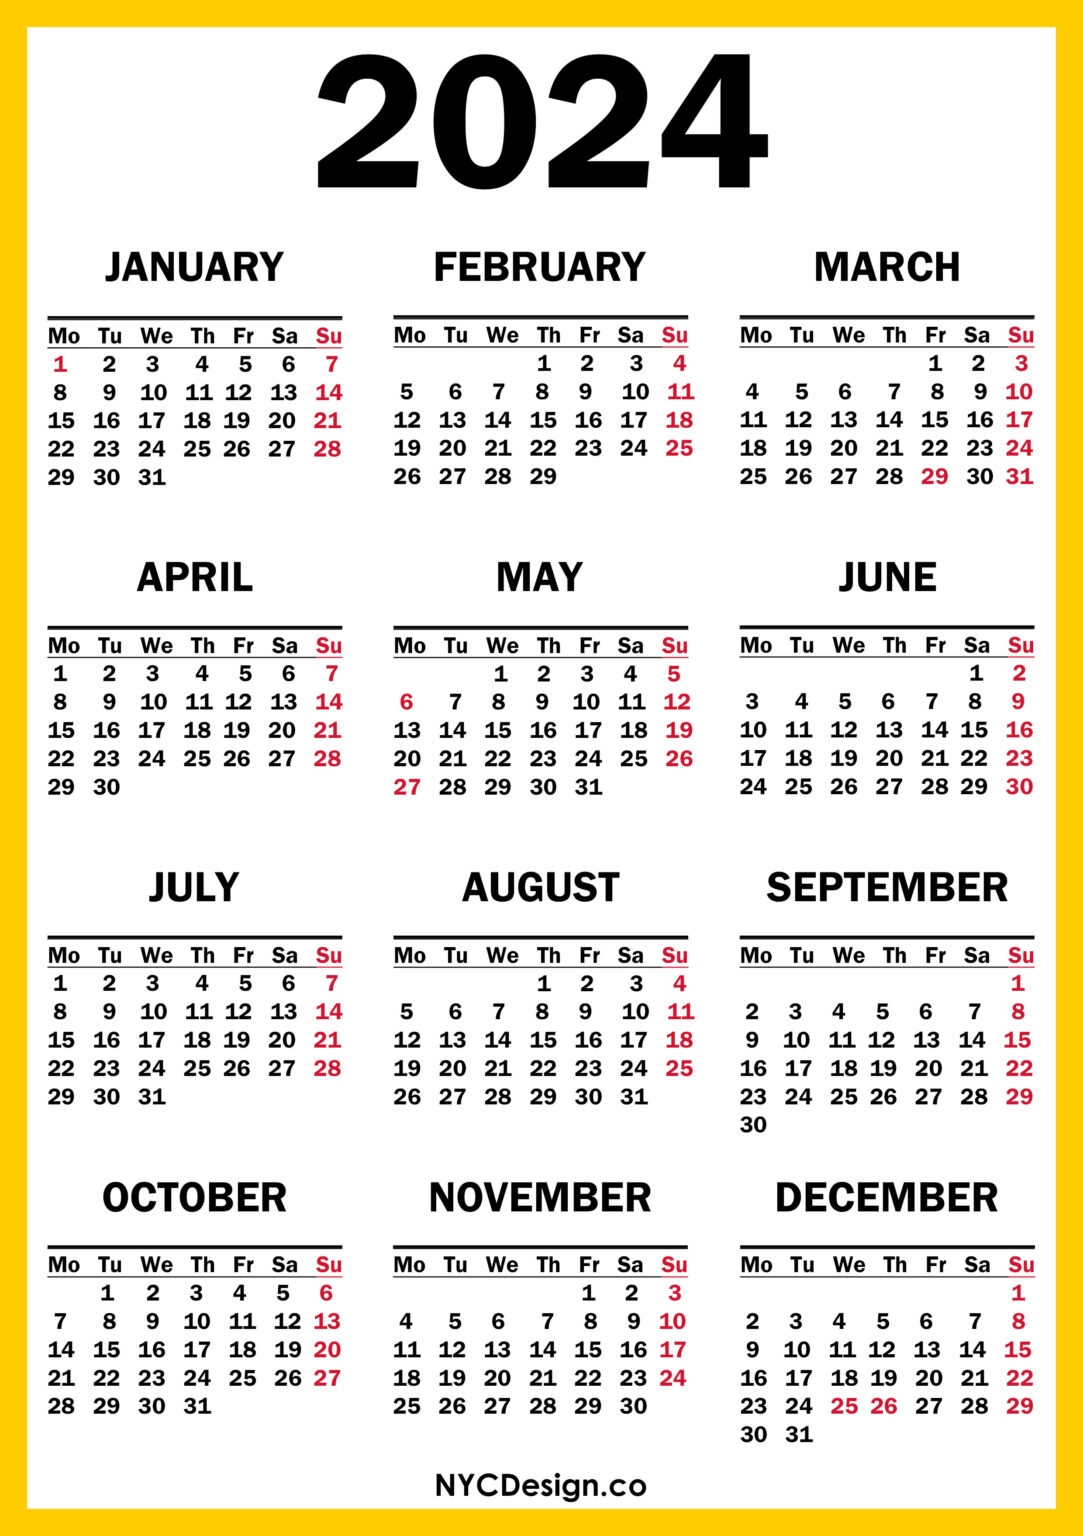 2024 Calendar Templates And Images Printable 2024 Calendar With Us - Free Printable 2024 Monthly Calendar With Holidays No Download